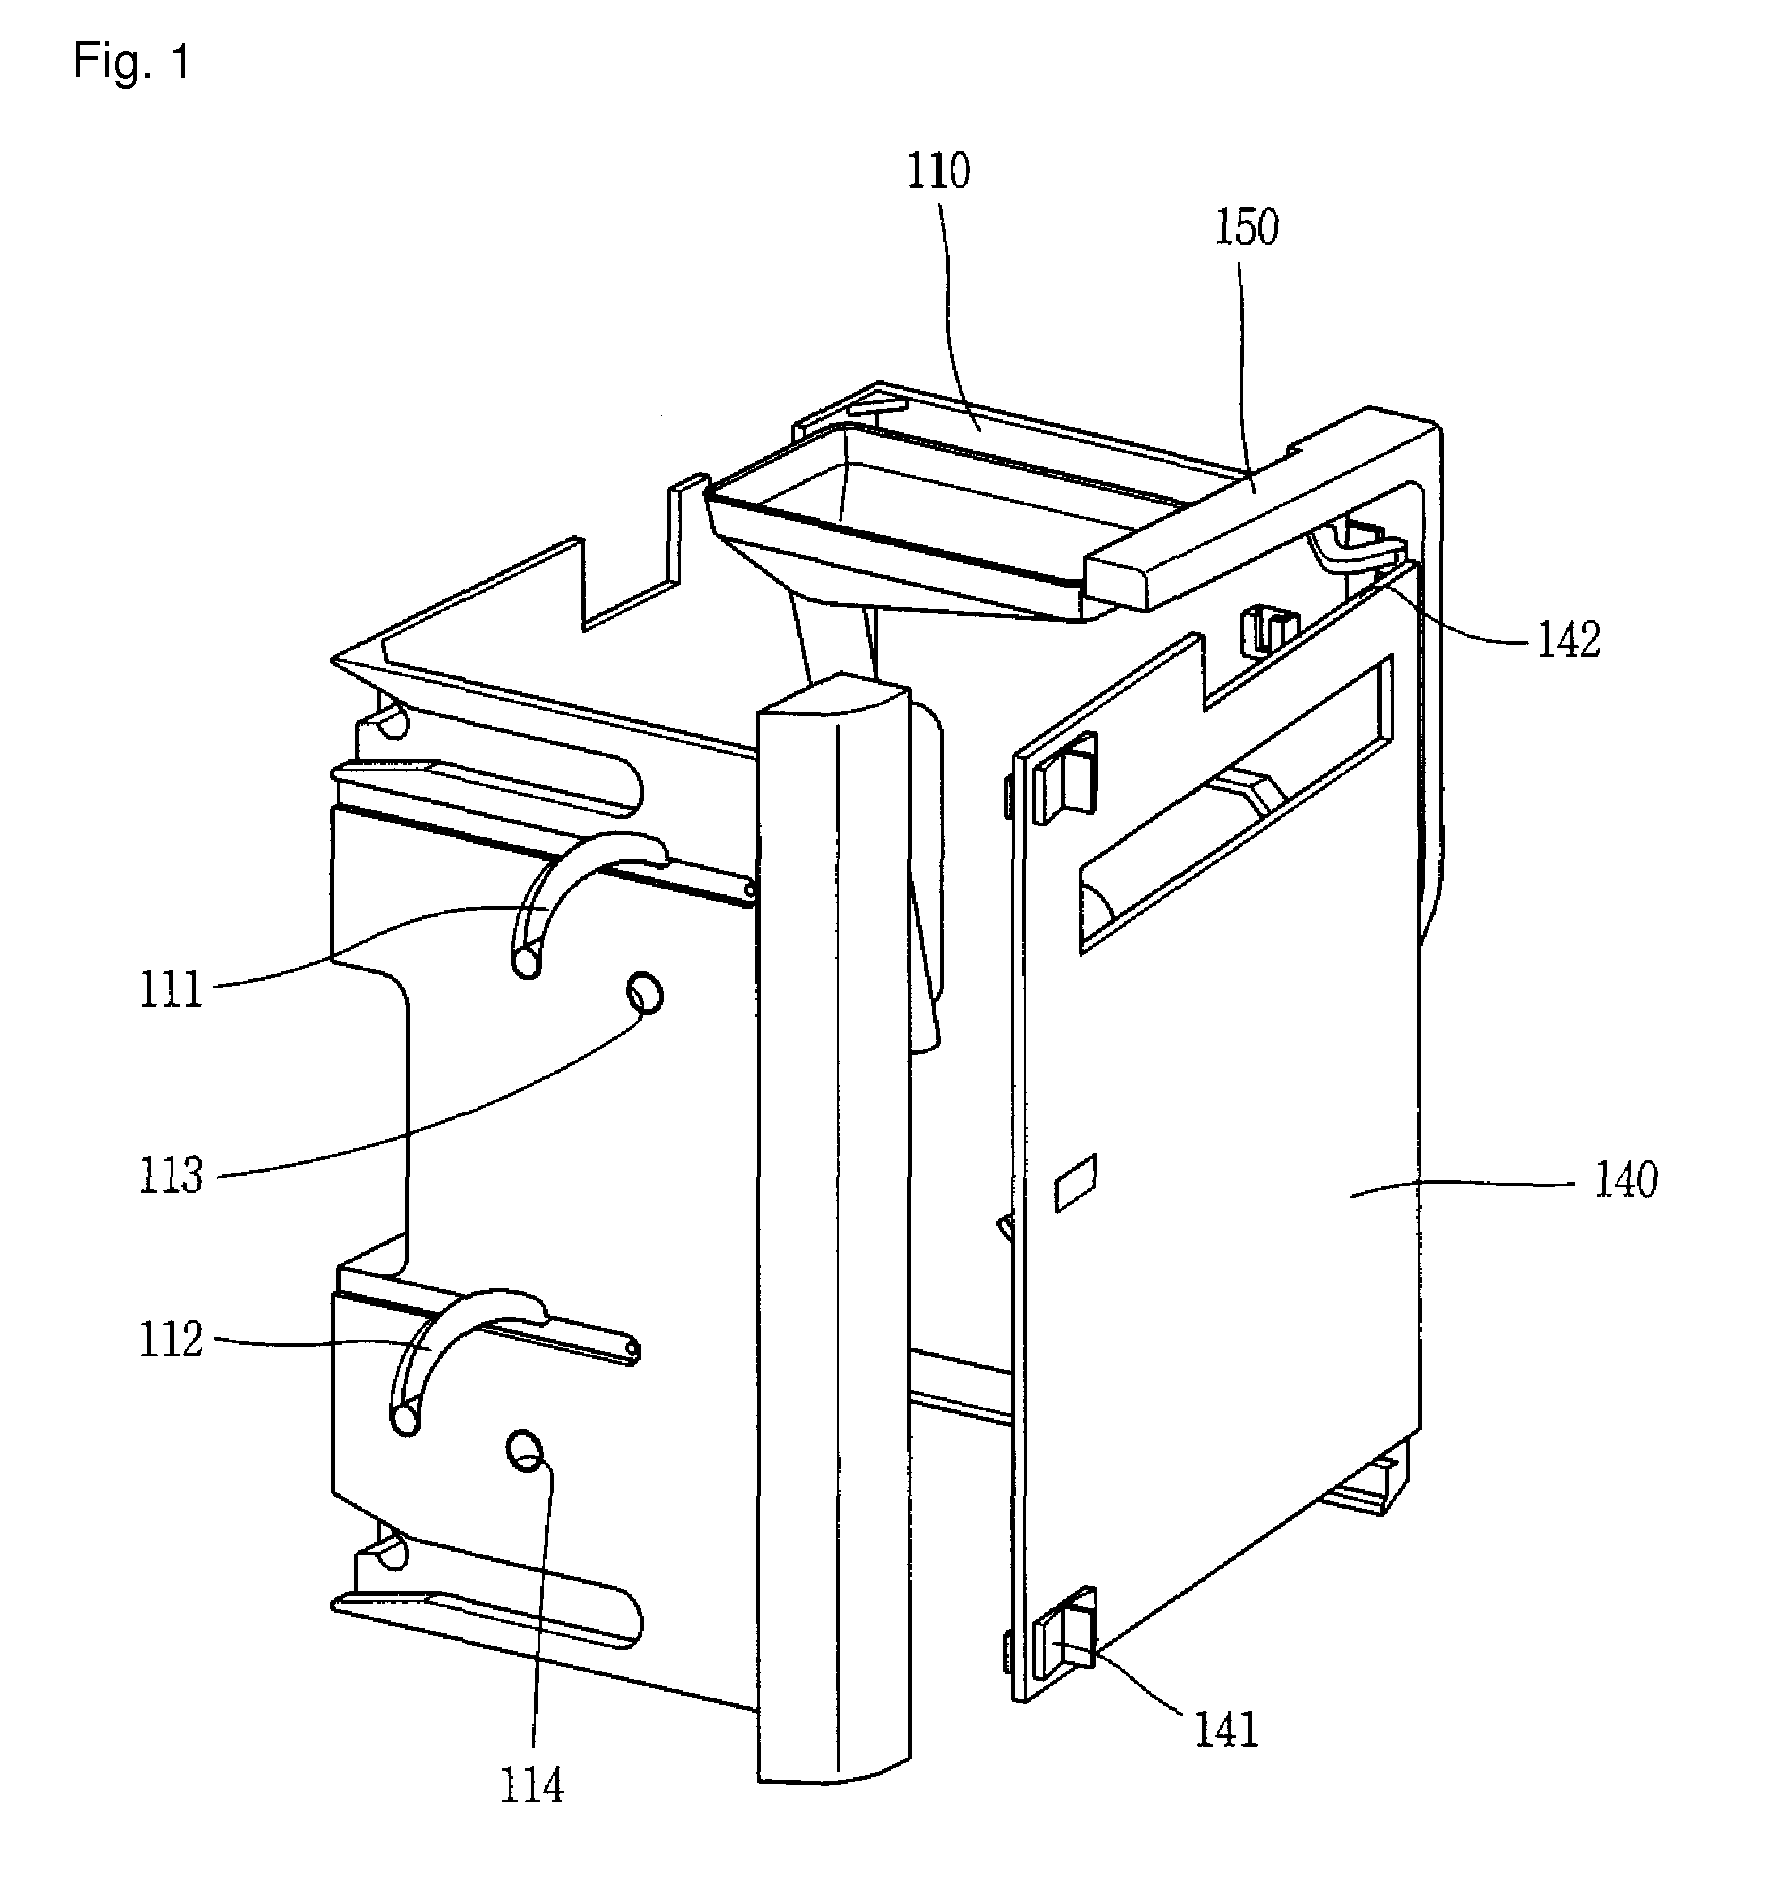 Ice making apparatus for refrigerator